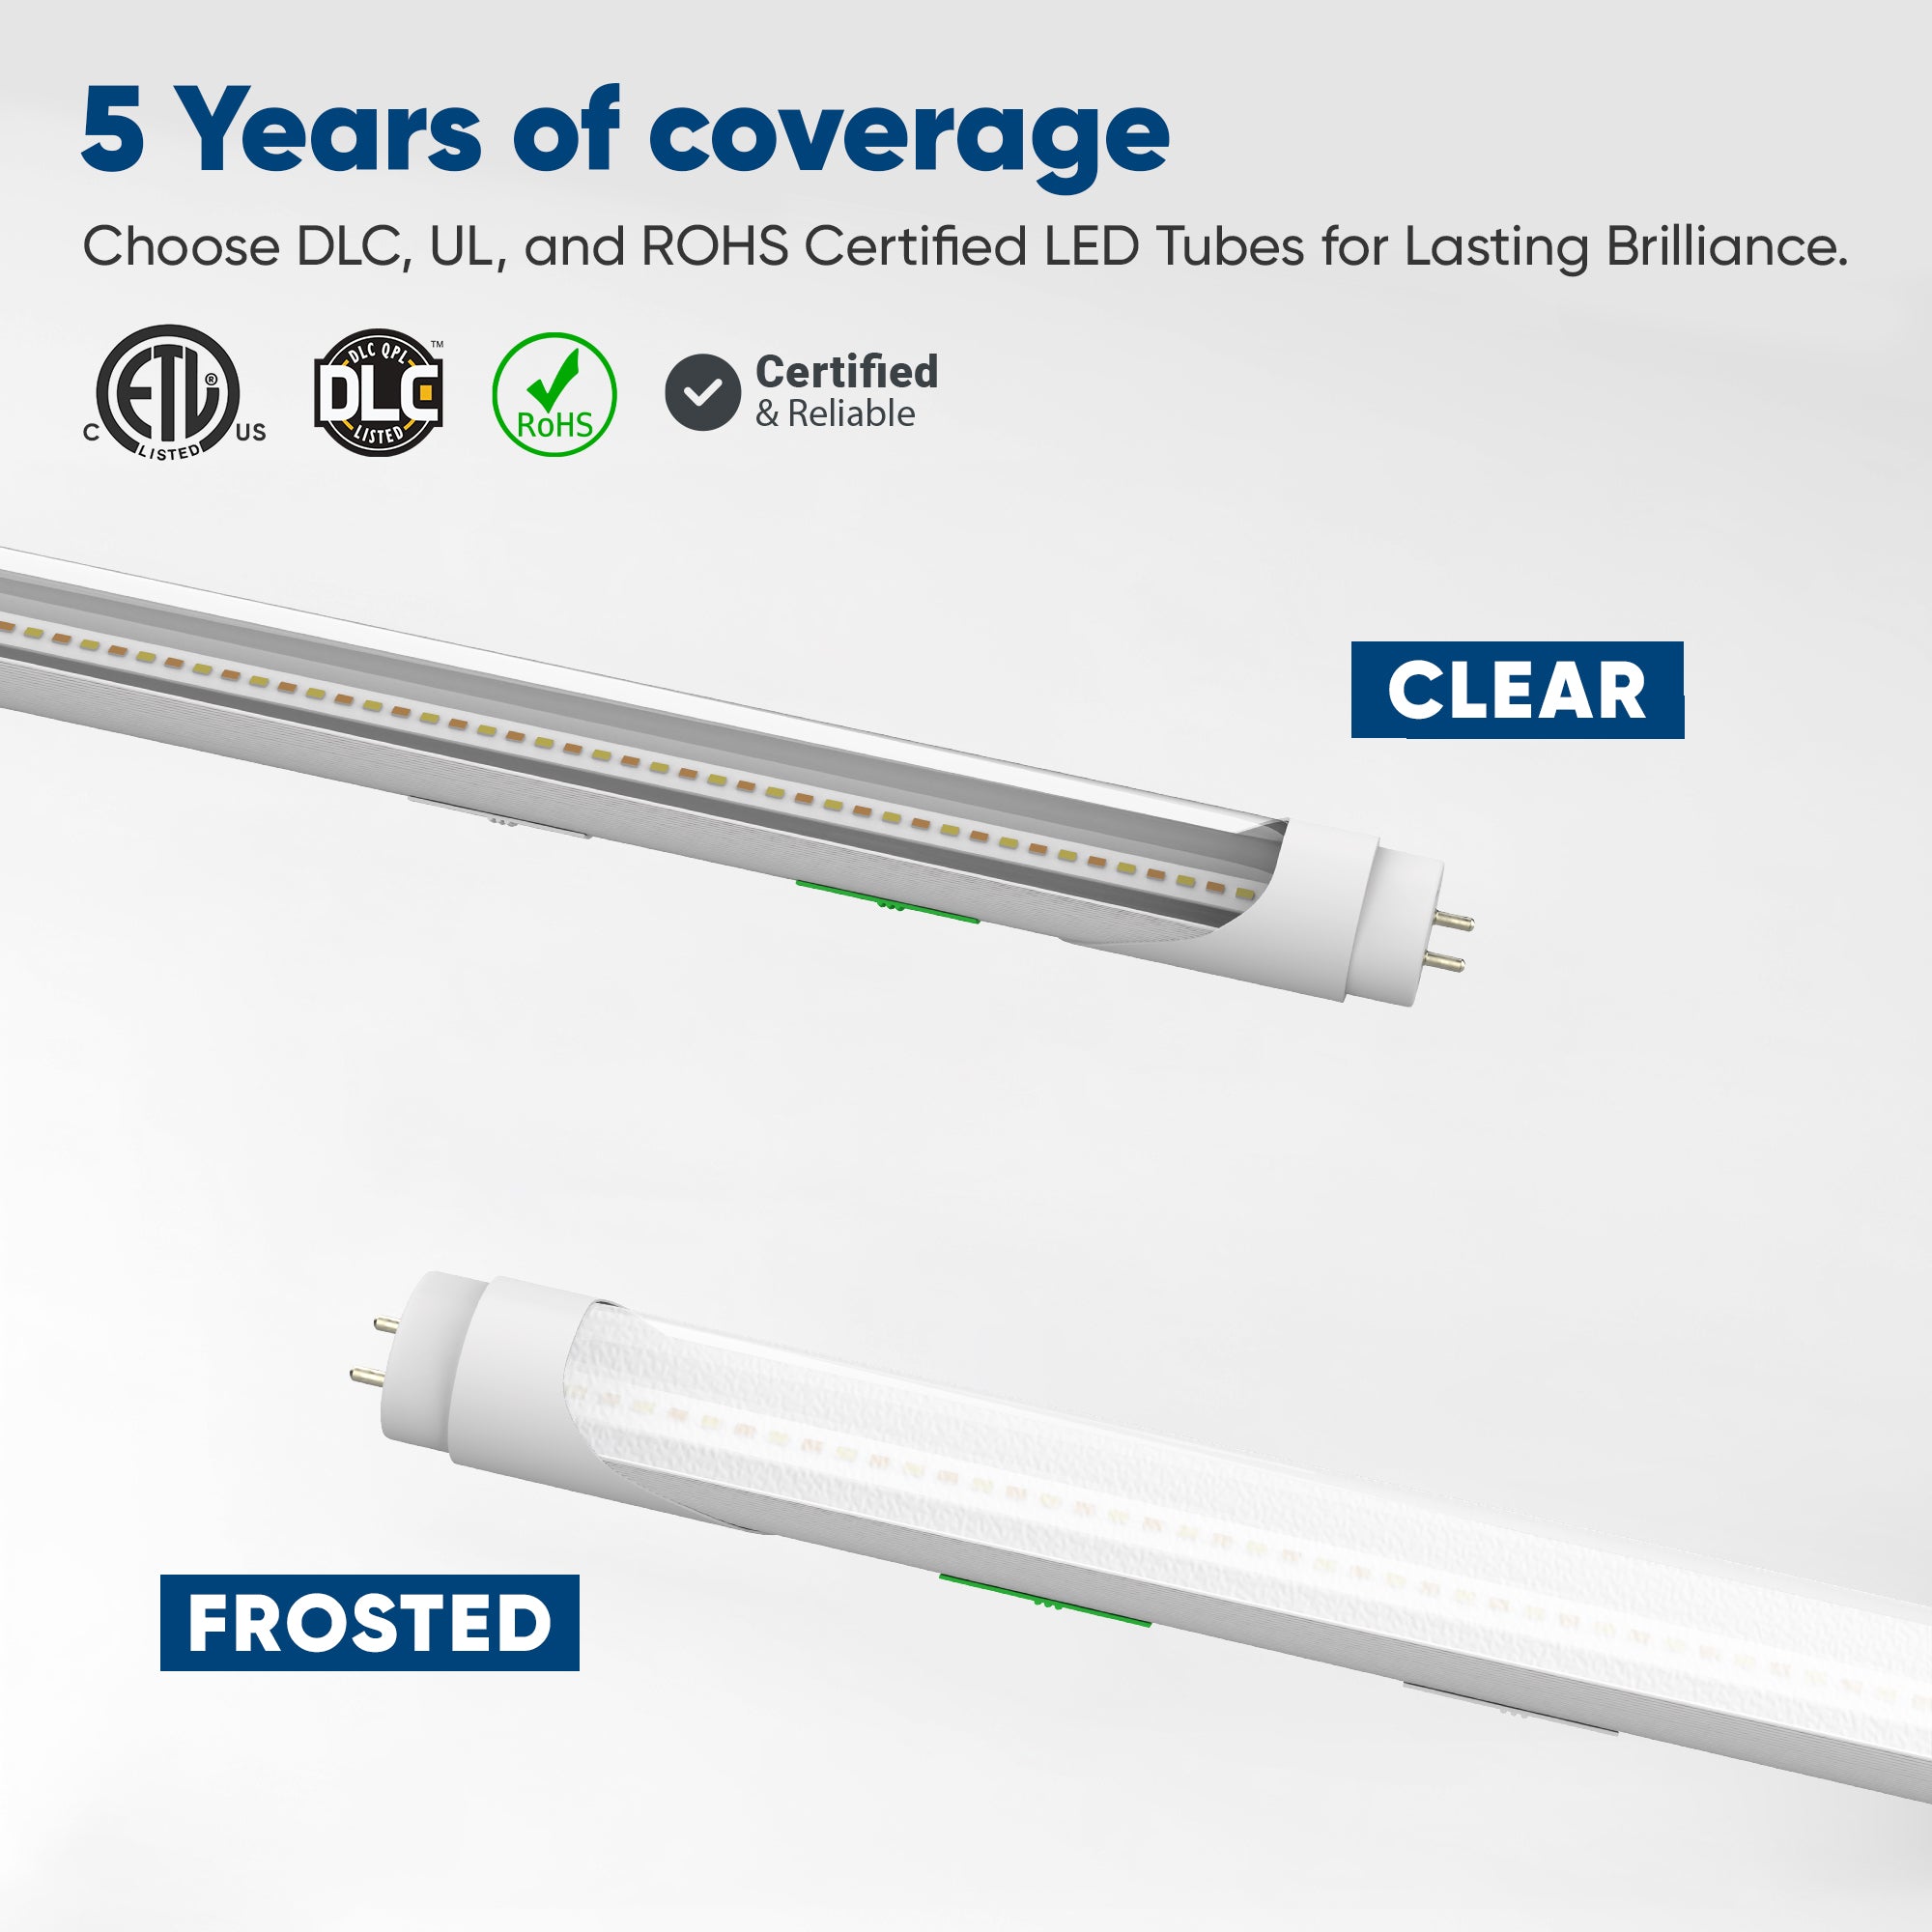 Hybrid T8 4ft LED Tube/Bulb - 22w/18w/15w/12w Wattage Adjustable, 130lm/w, 3000k/4000k/5000k/6500k CCT Changeable, Frosted, Base G13, Single End/Double End Power - Ballast Compatible or Bypass